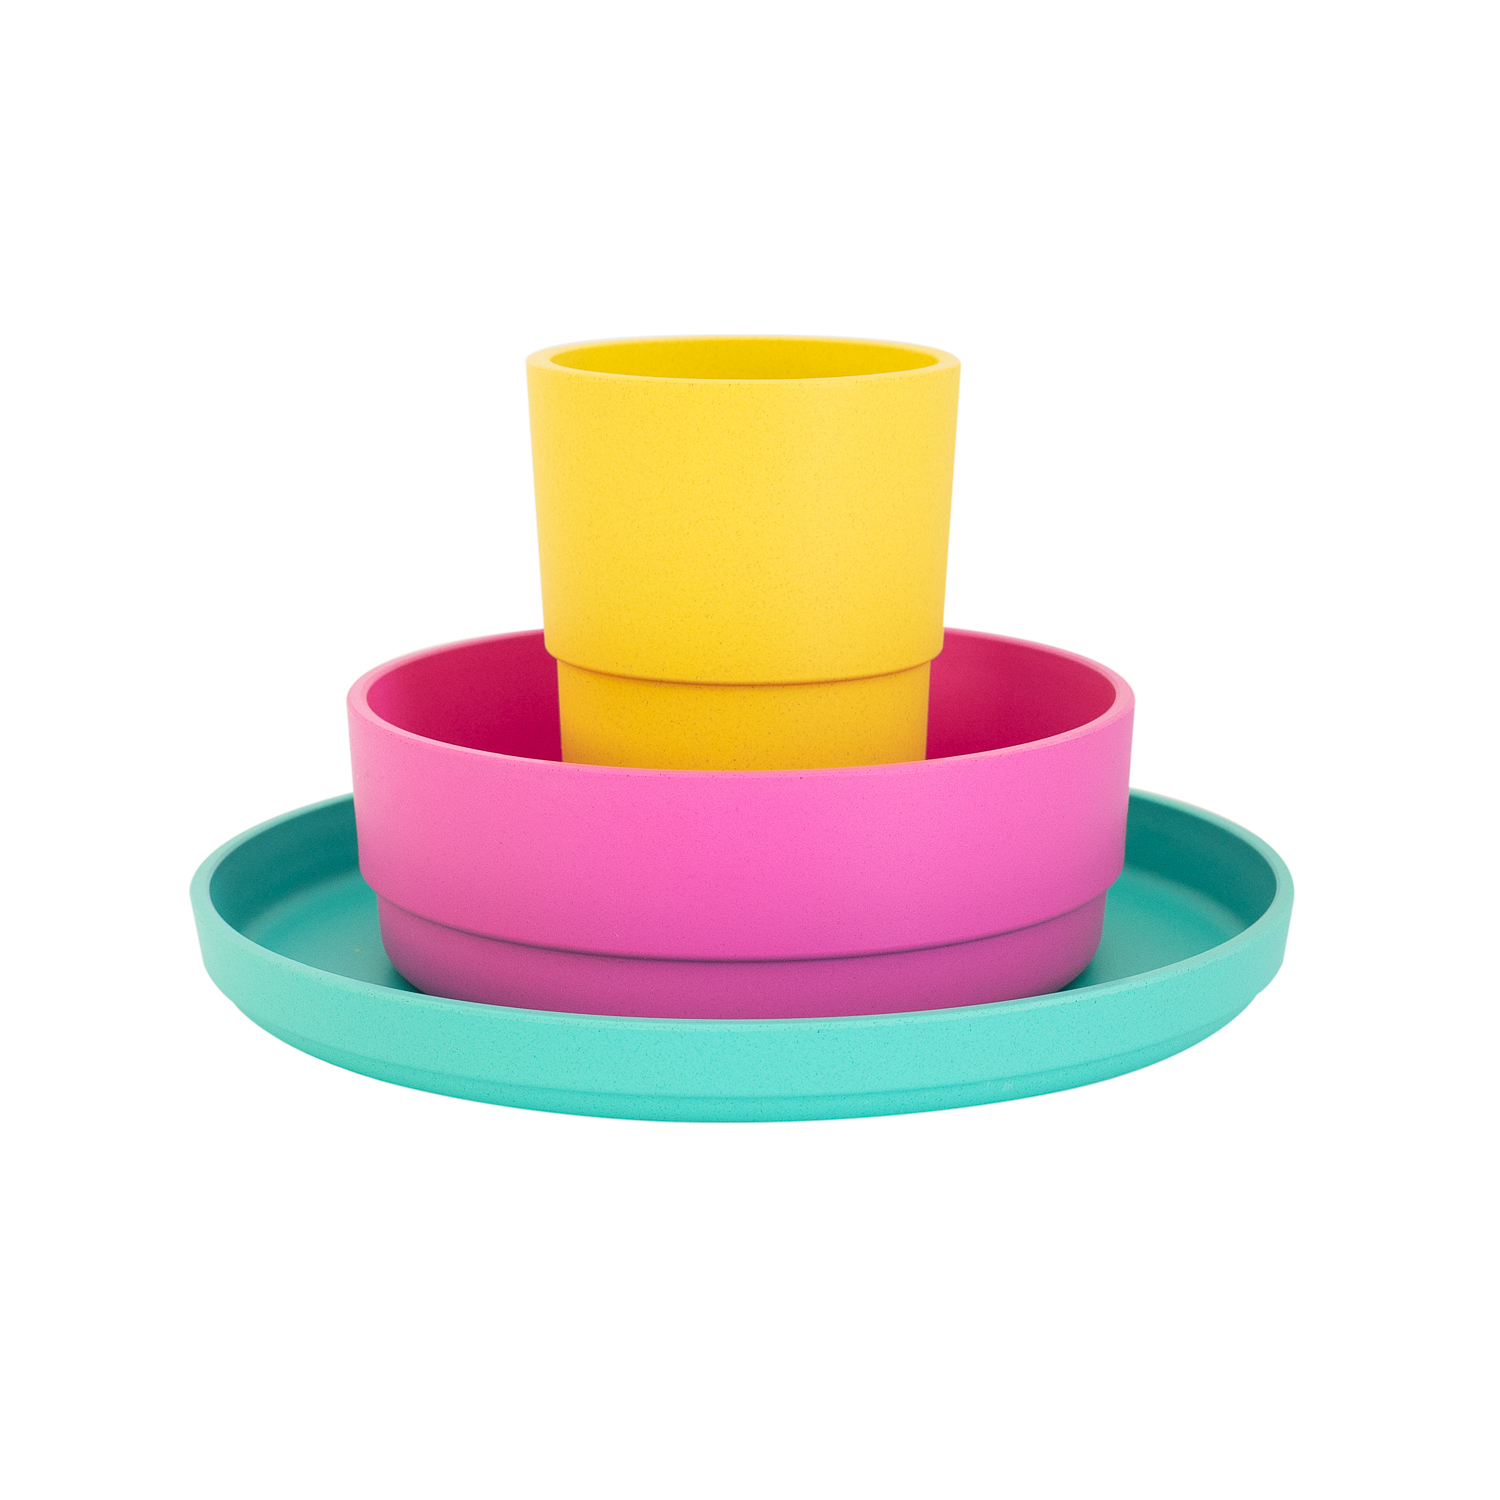 Bobo&Boo Colorful Plant-Based 7.5 inch Kids Plates for Toddler Eating Plant-Based Eco-Friendly Toddler Plate Set for Boys and Girls In a Tropical Color Scheme Melamine-Free And BPA-Free Set of 3